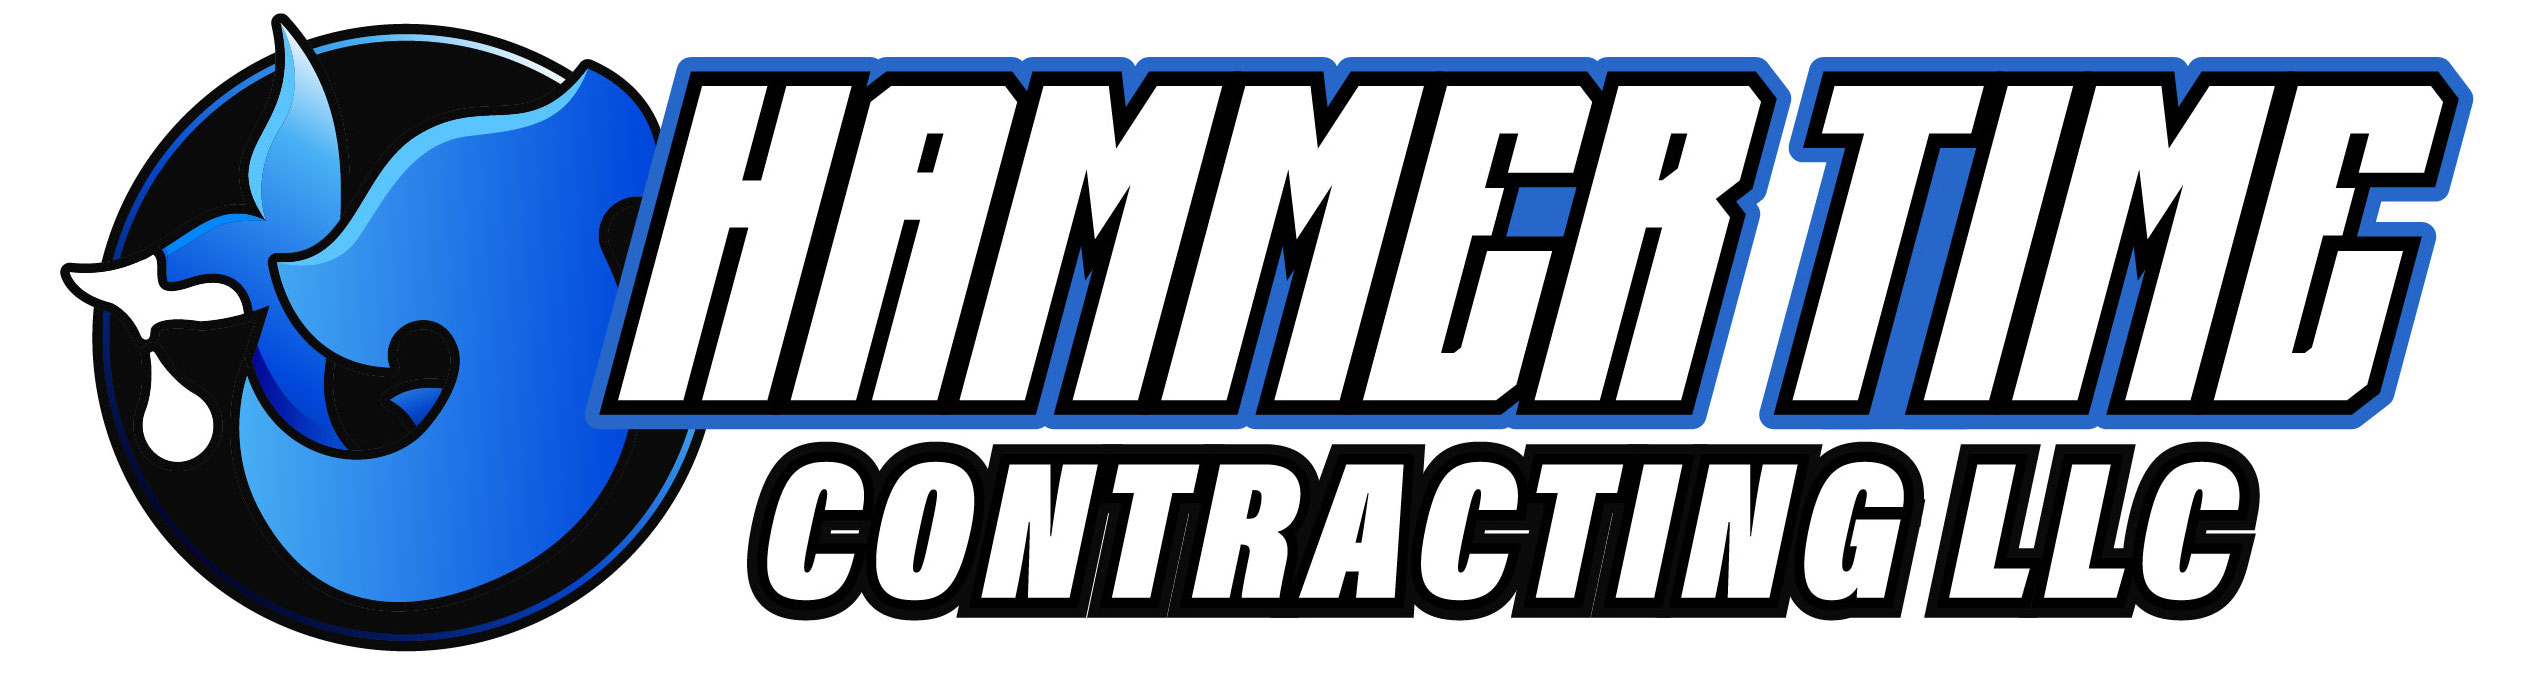 Hammer Time Contracting Logo